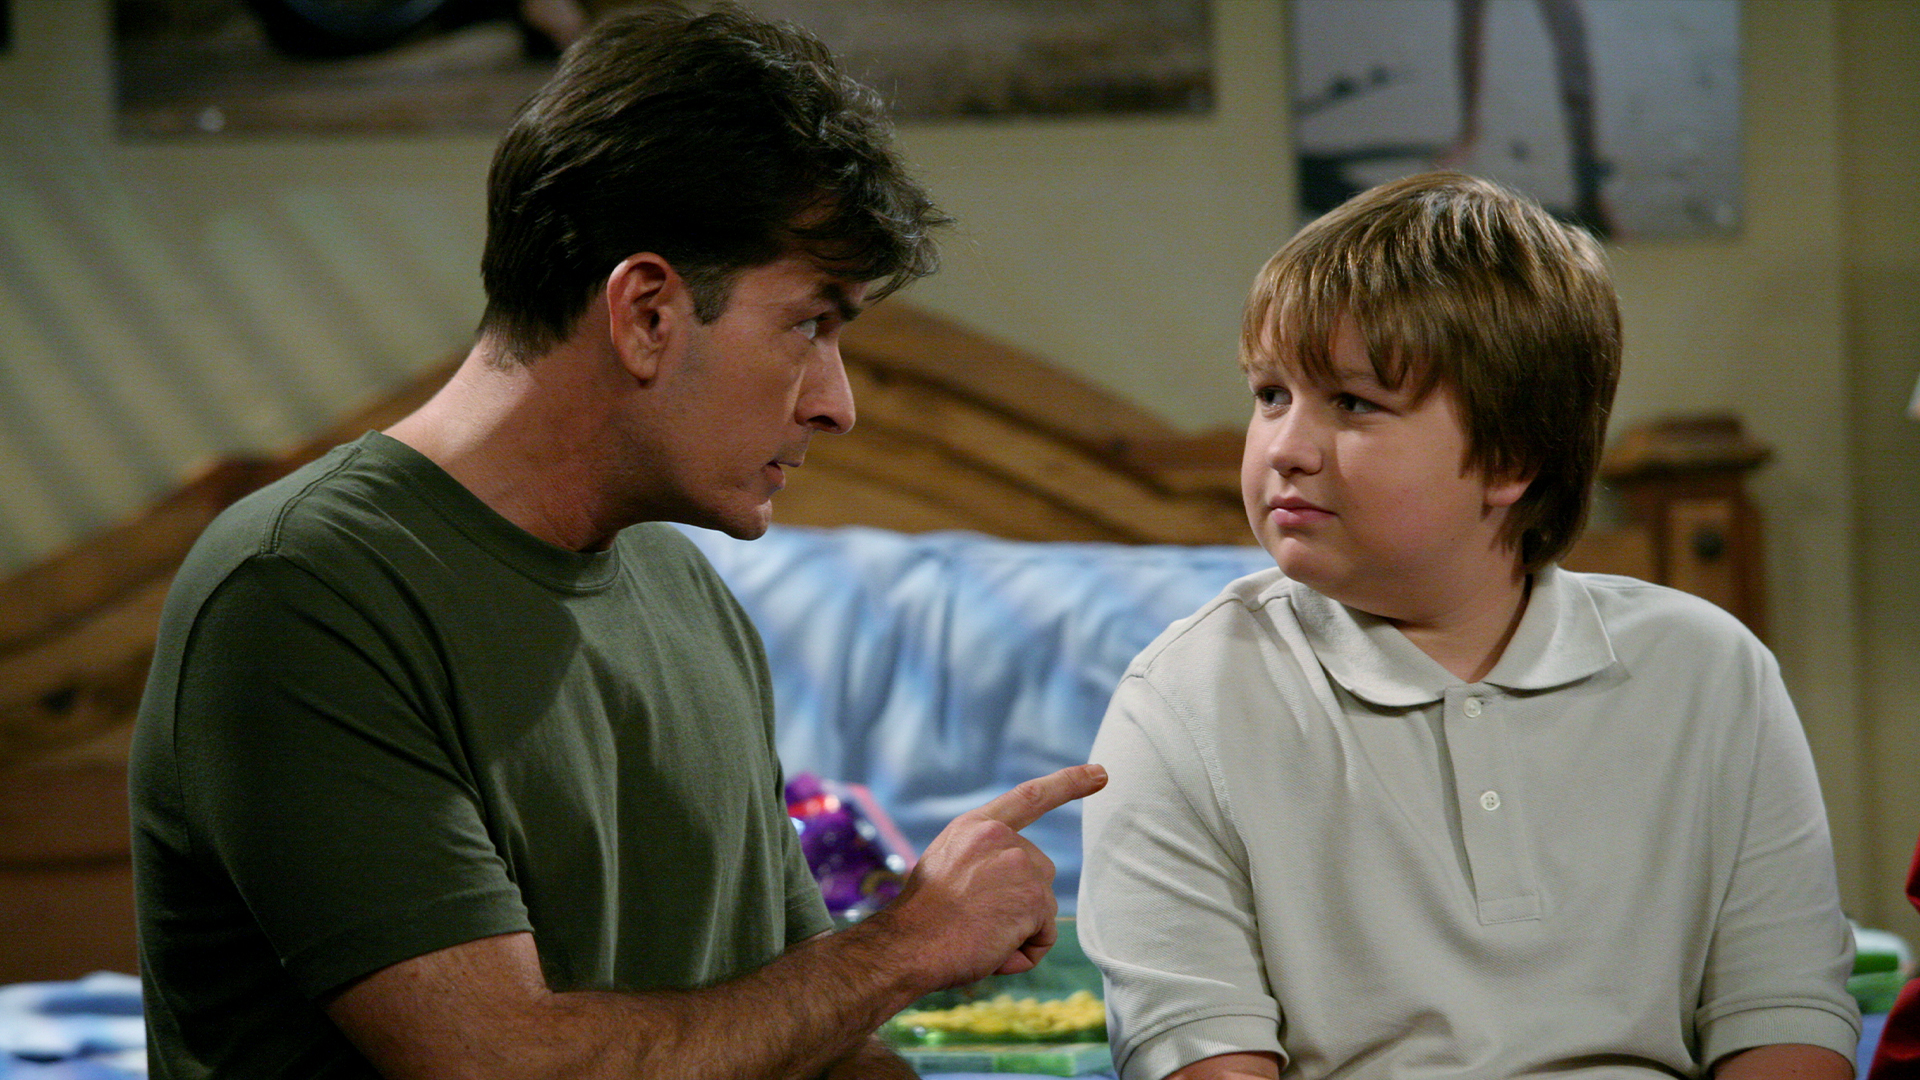 Two and a Half Men Season 5 Episode 1 - Large Birds, Spiders and Mom